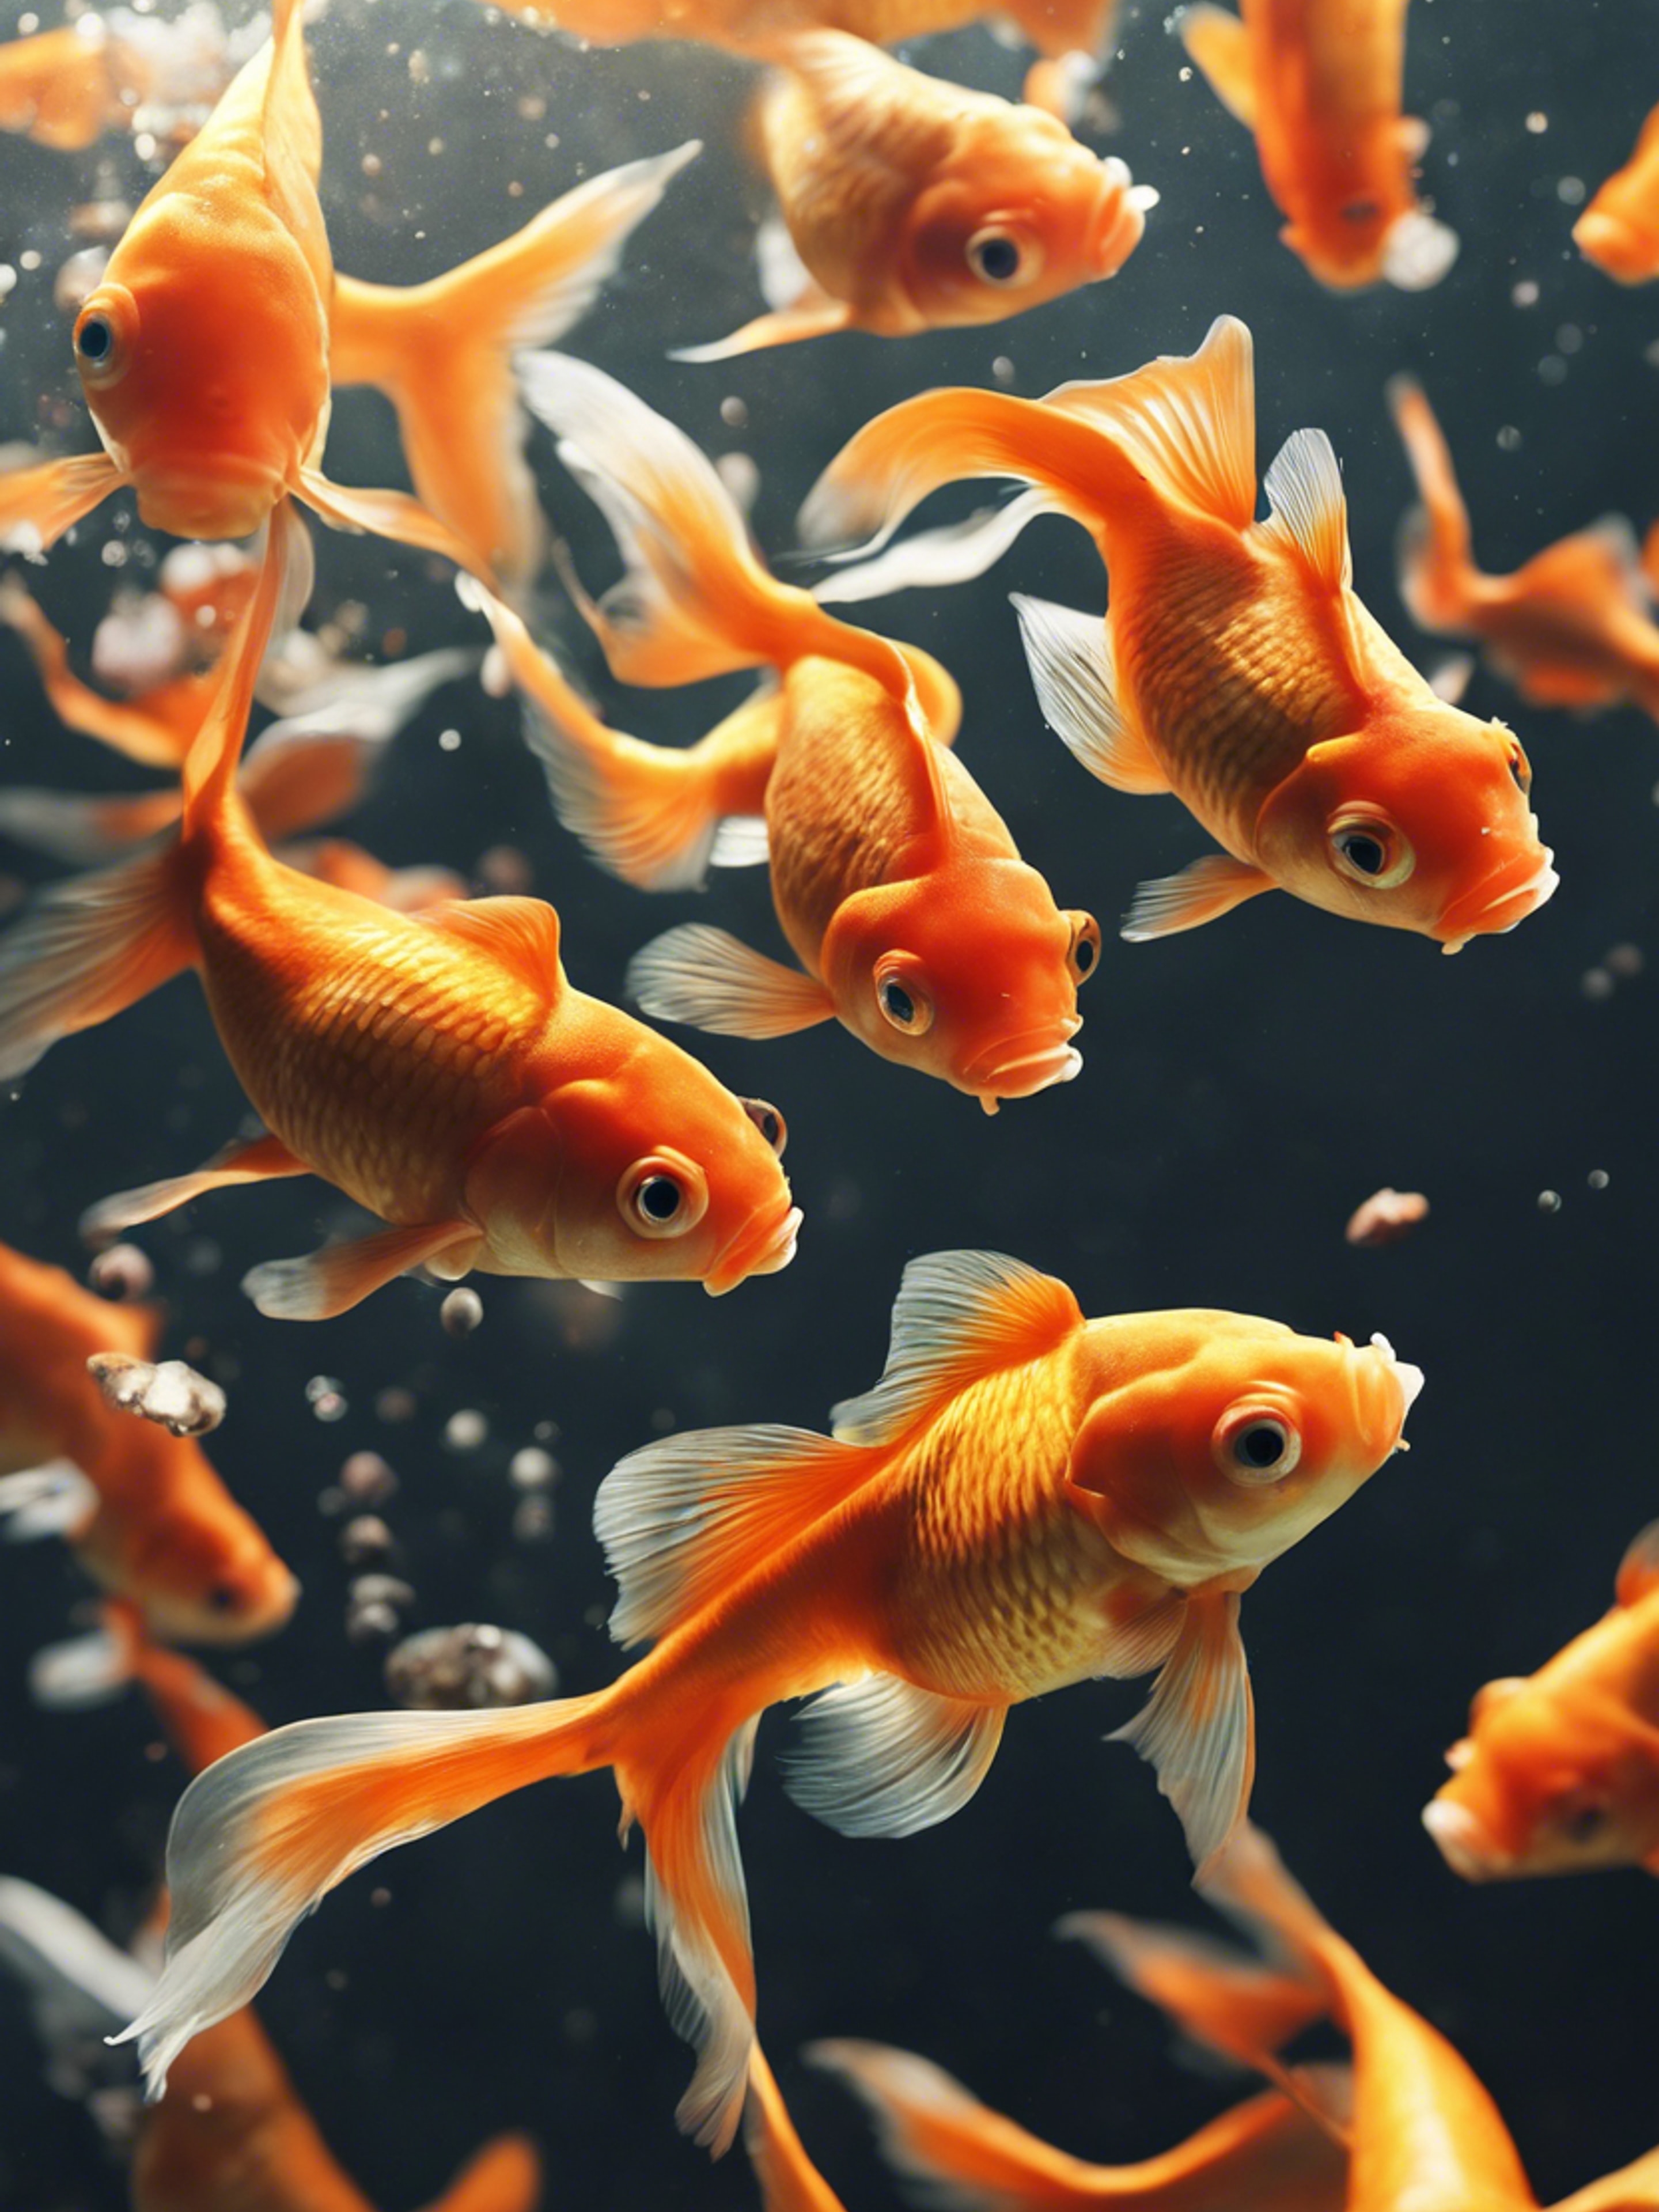 A group of goldfish gathered together feeding on floating fish food in a pond. Tapeta[884d4a7ab78e48ae91a0]